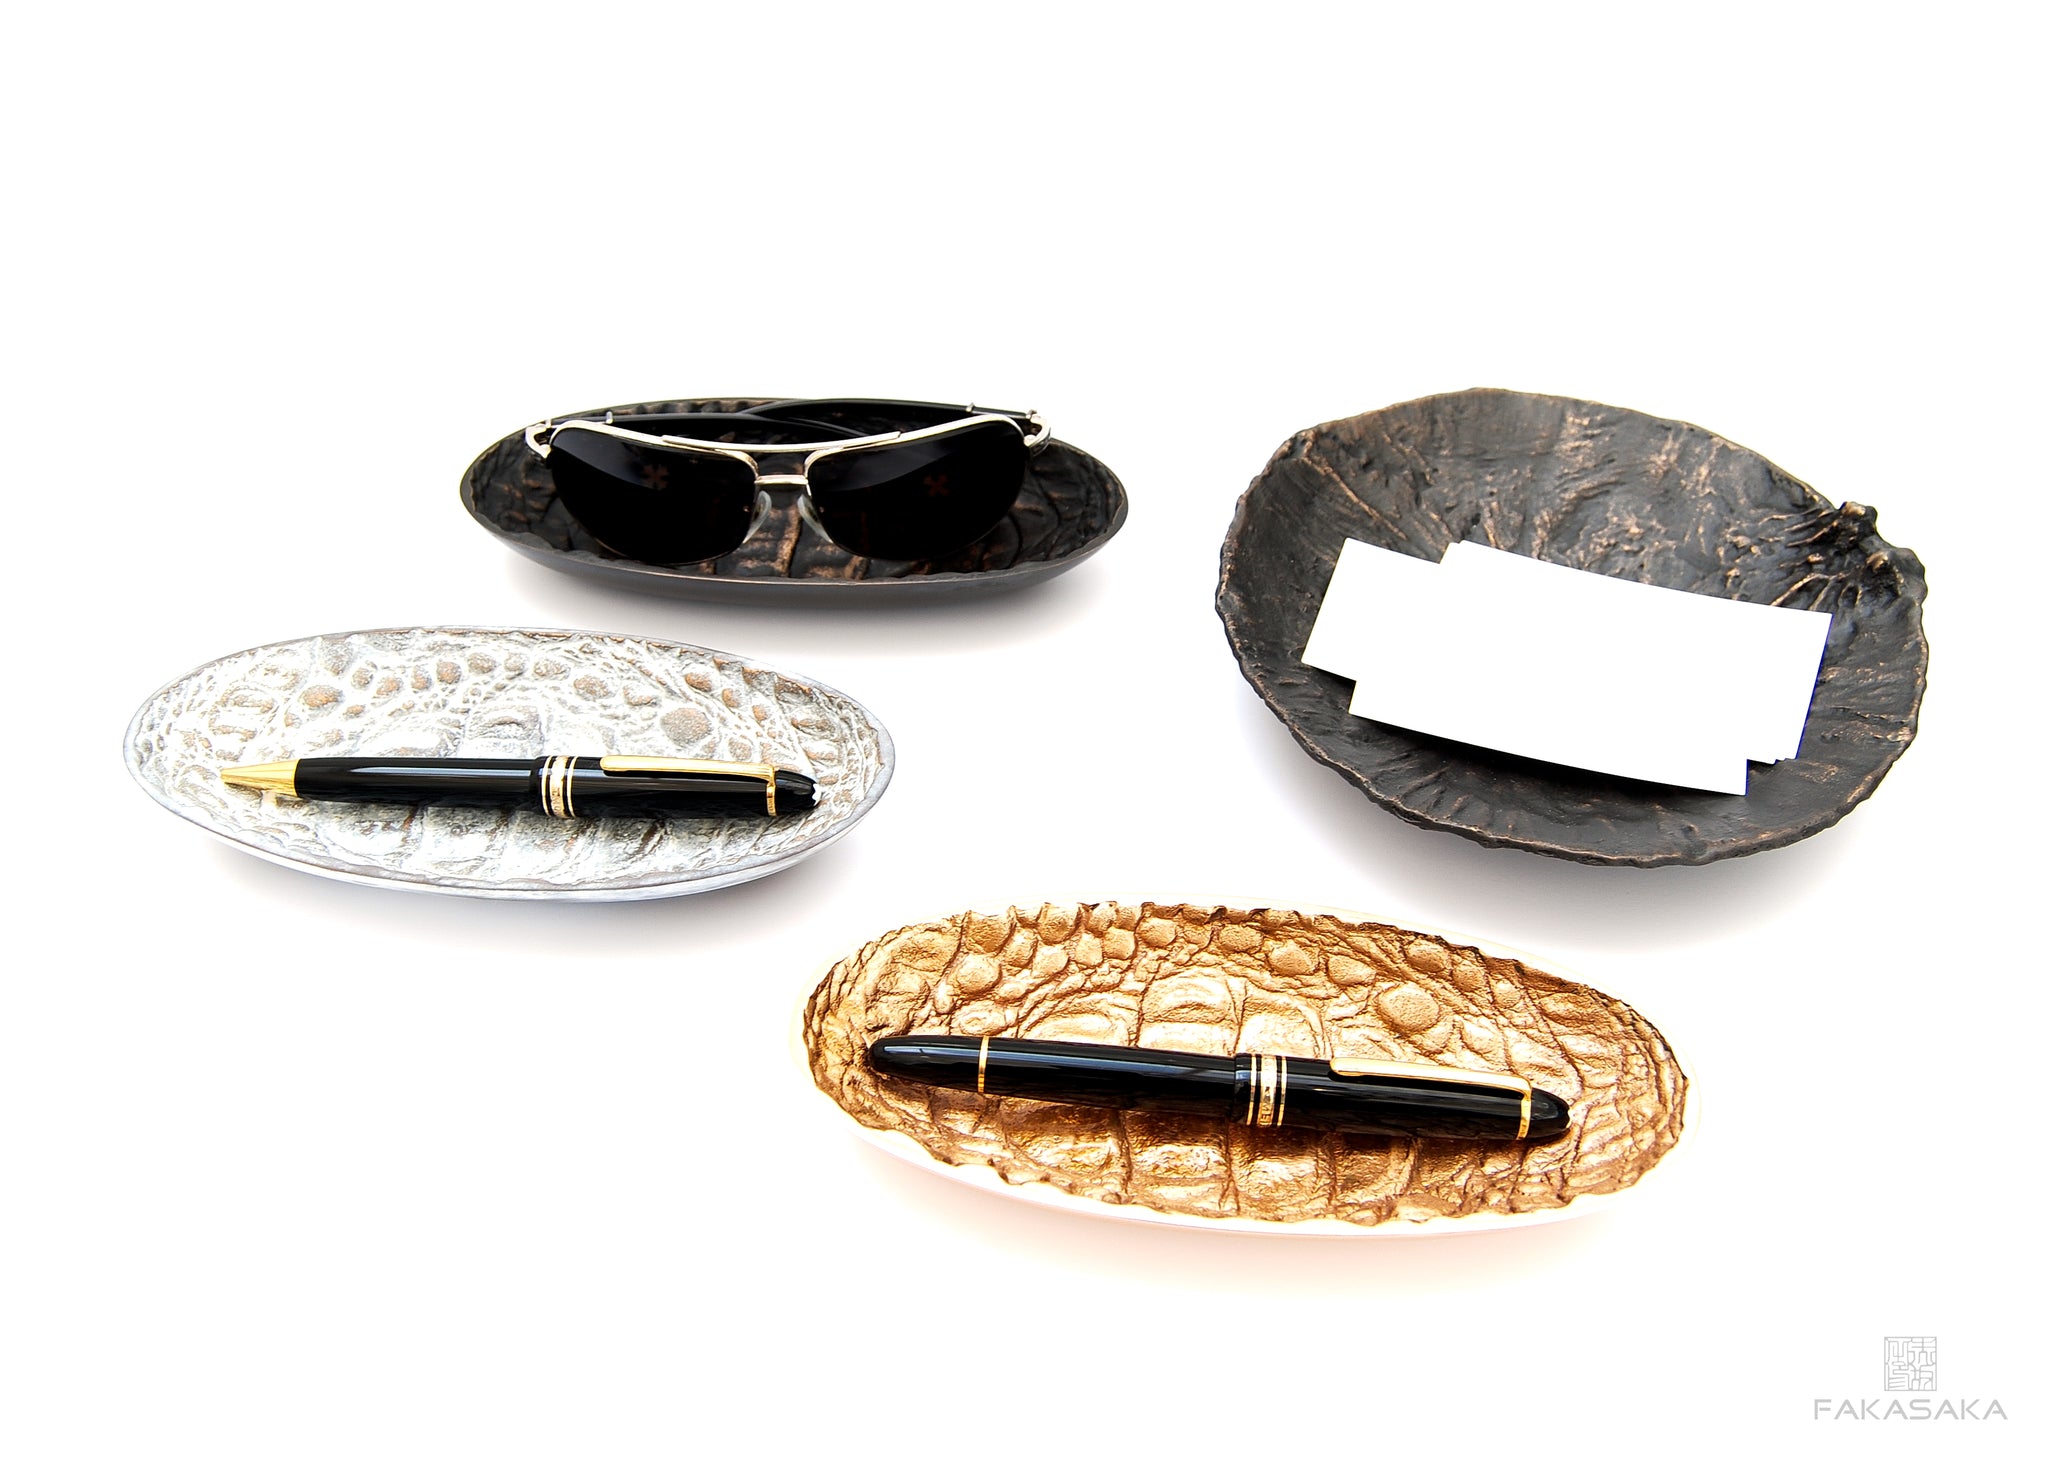 POLLY JEAN<br><br>SMALL TRAY / SMALL BOWL / ASHTRAY / CARD HOLDER / PEN HOLDER<br><br>BLACKBROWN BRONZE